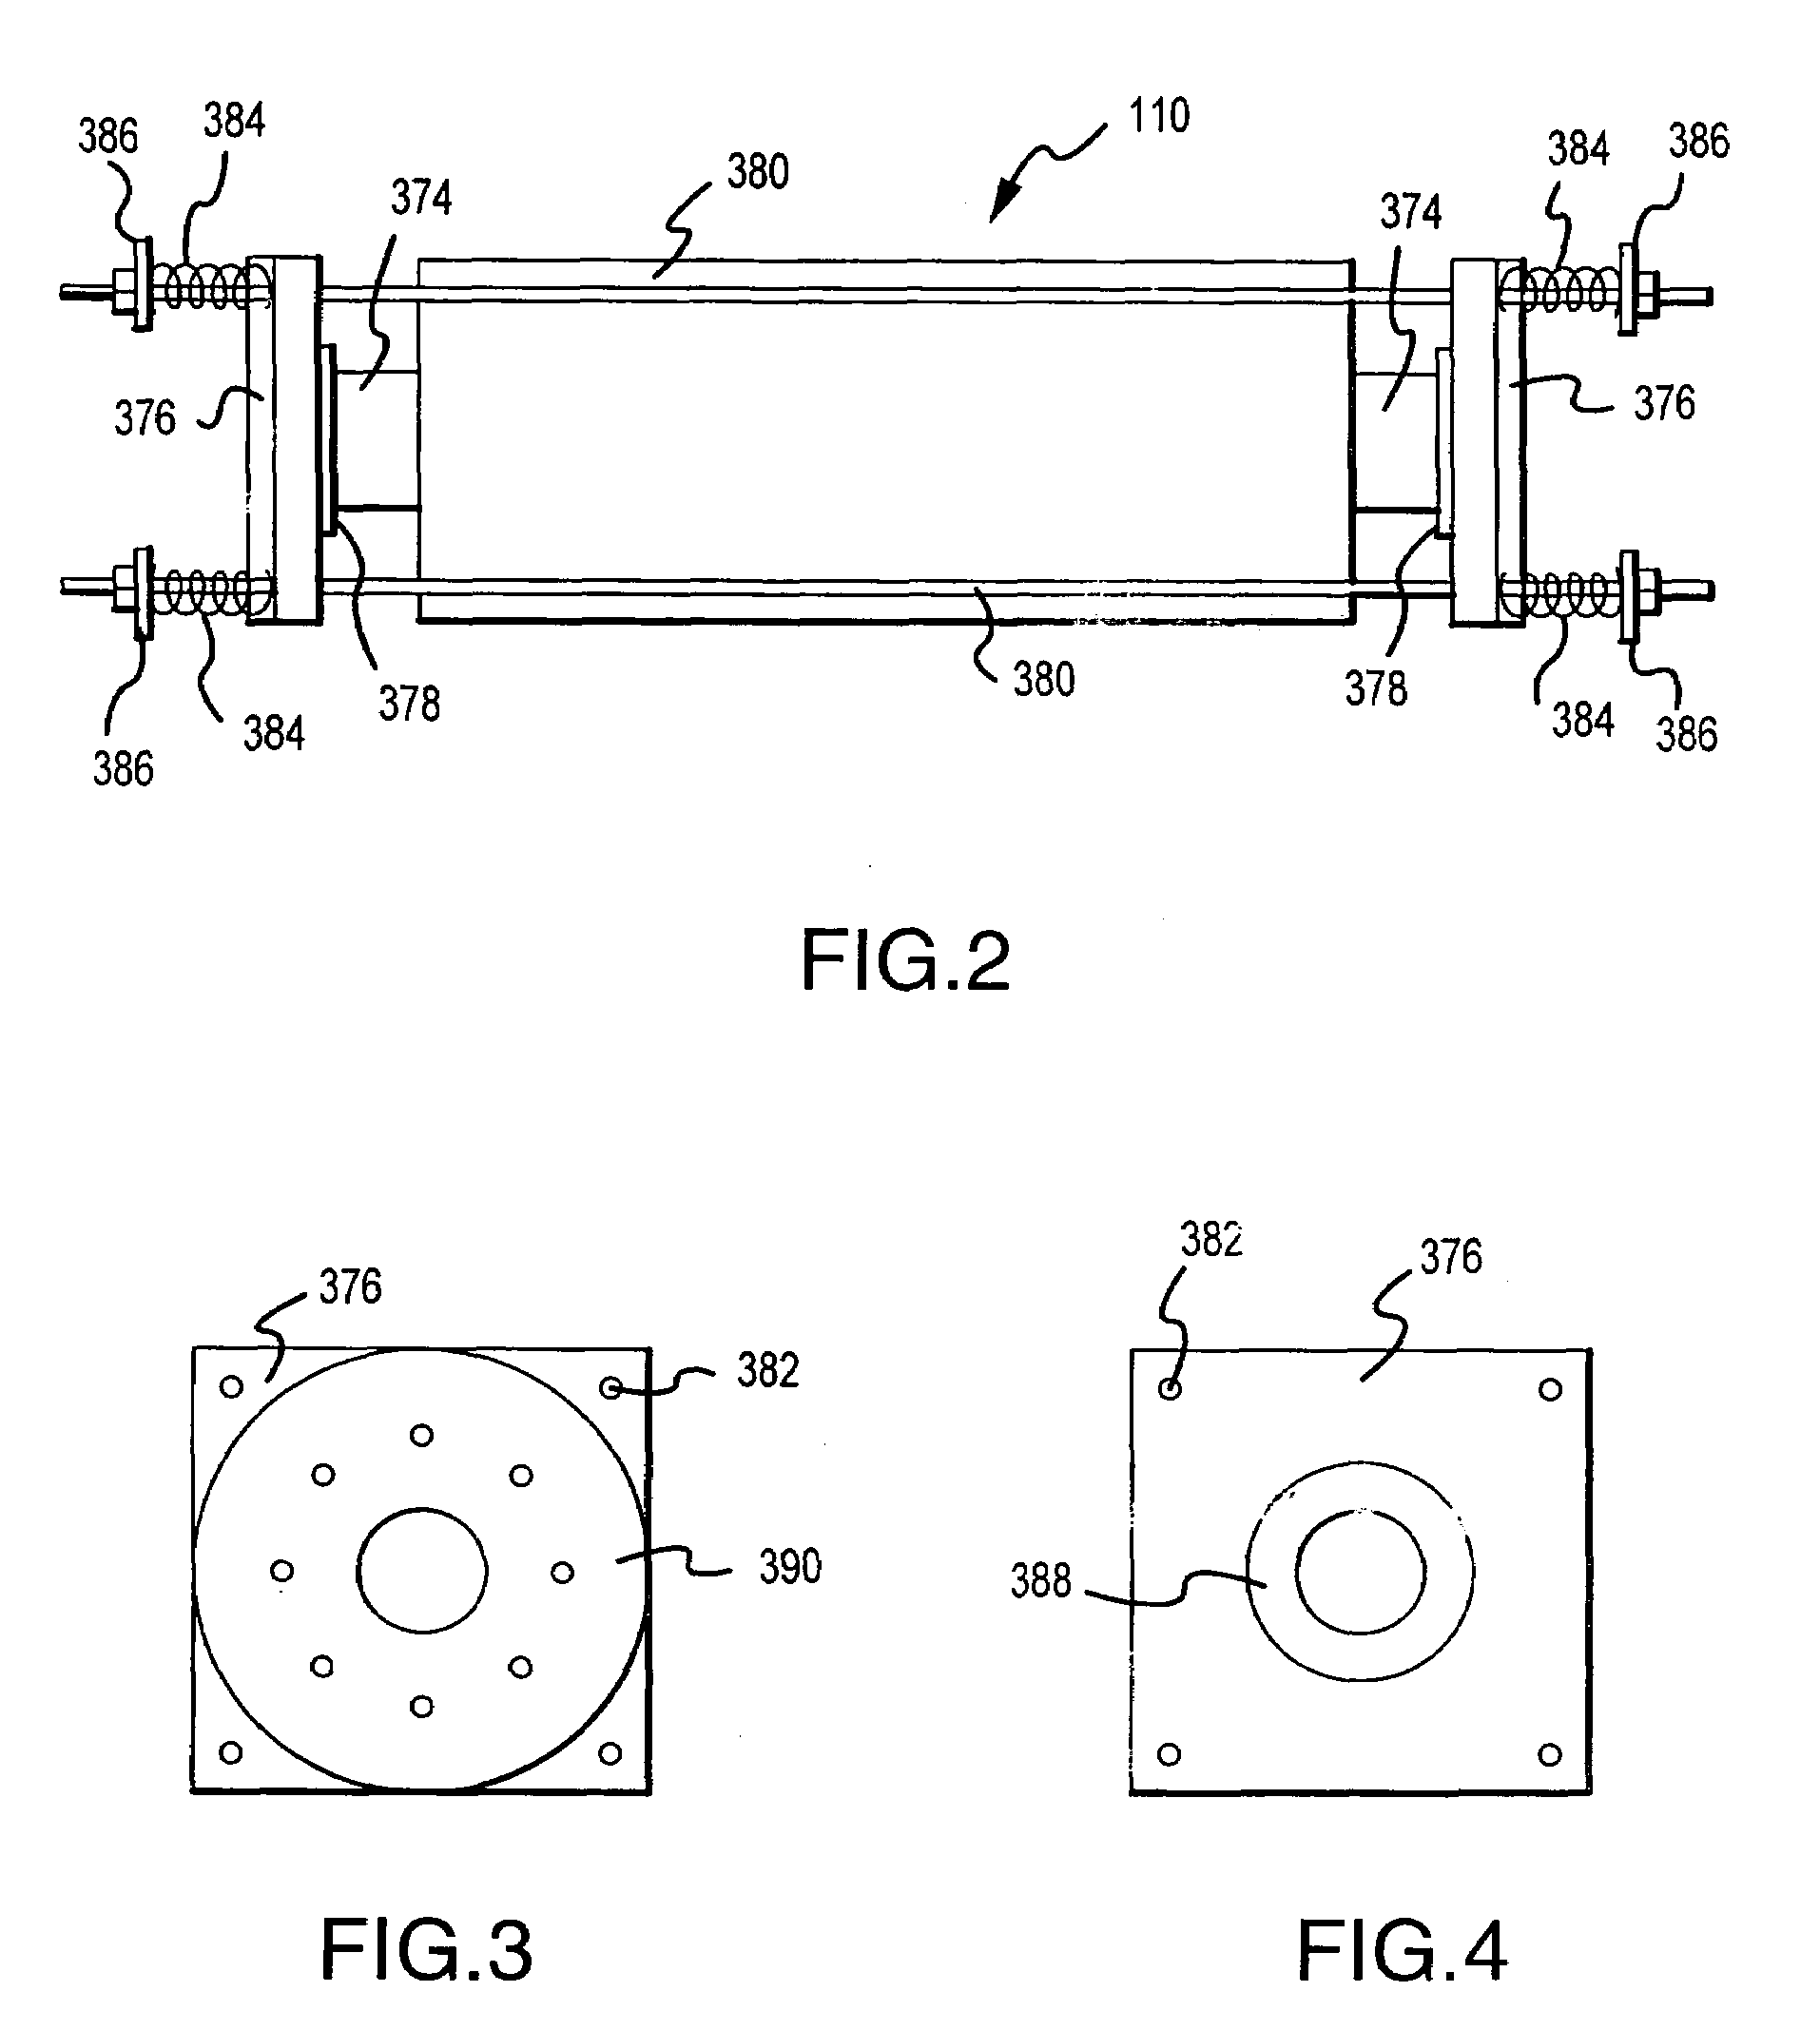 Oxygen-containing phosphor powders, methods for making phosphor powders and devices incorporating same